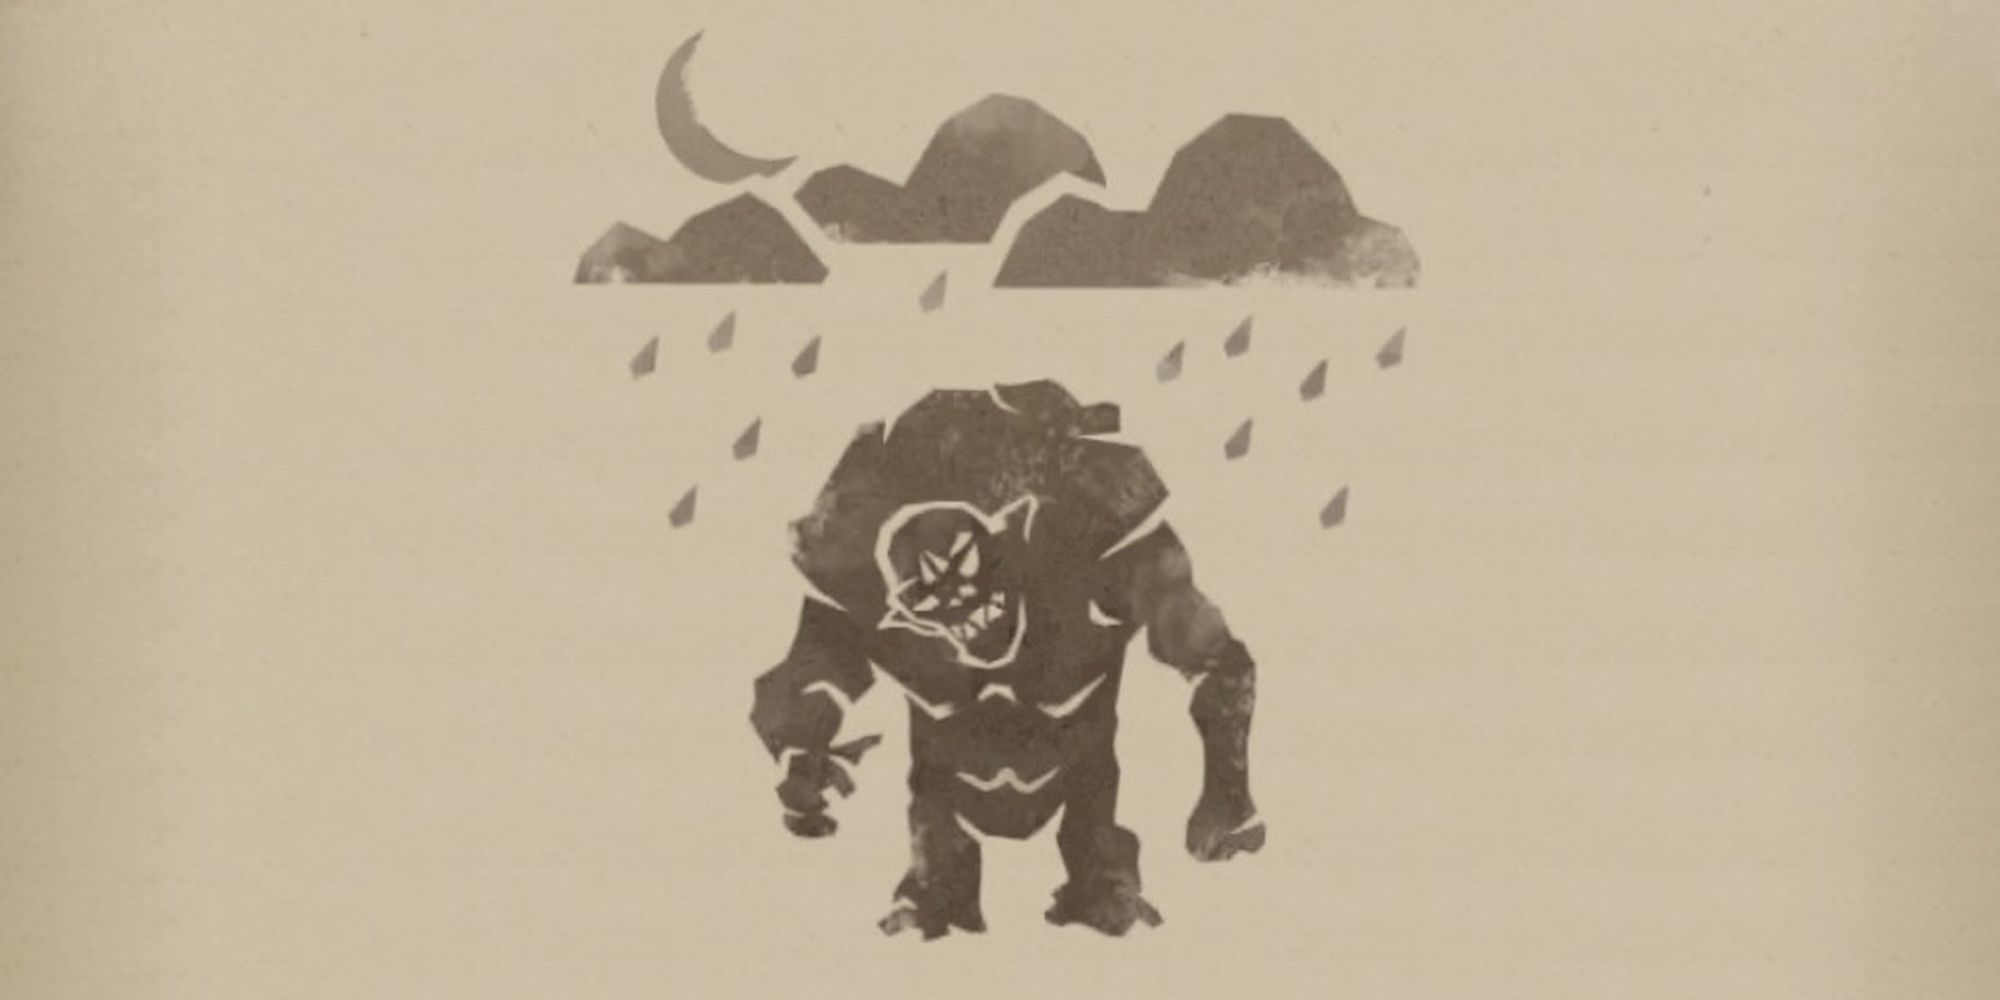 The Witcher: Monster Slayer: Drawing showing a monster with rain clouds and a crescent moon above its head